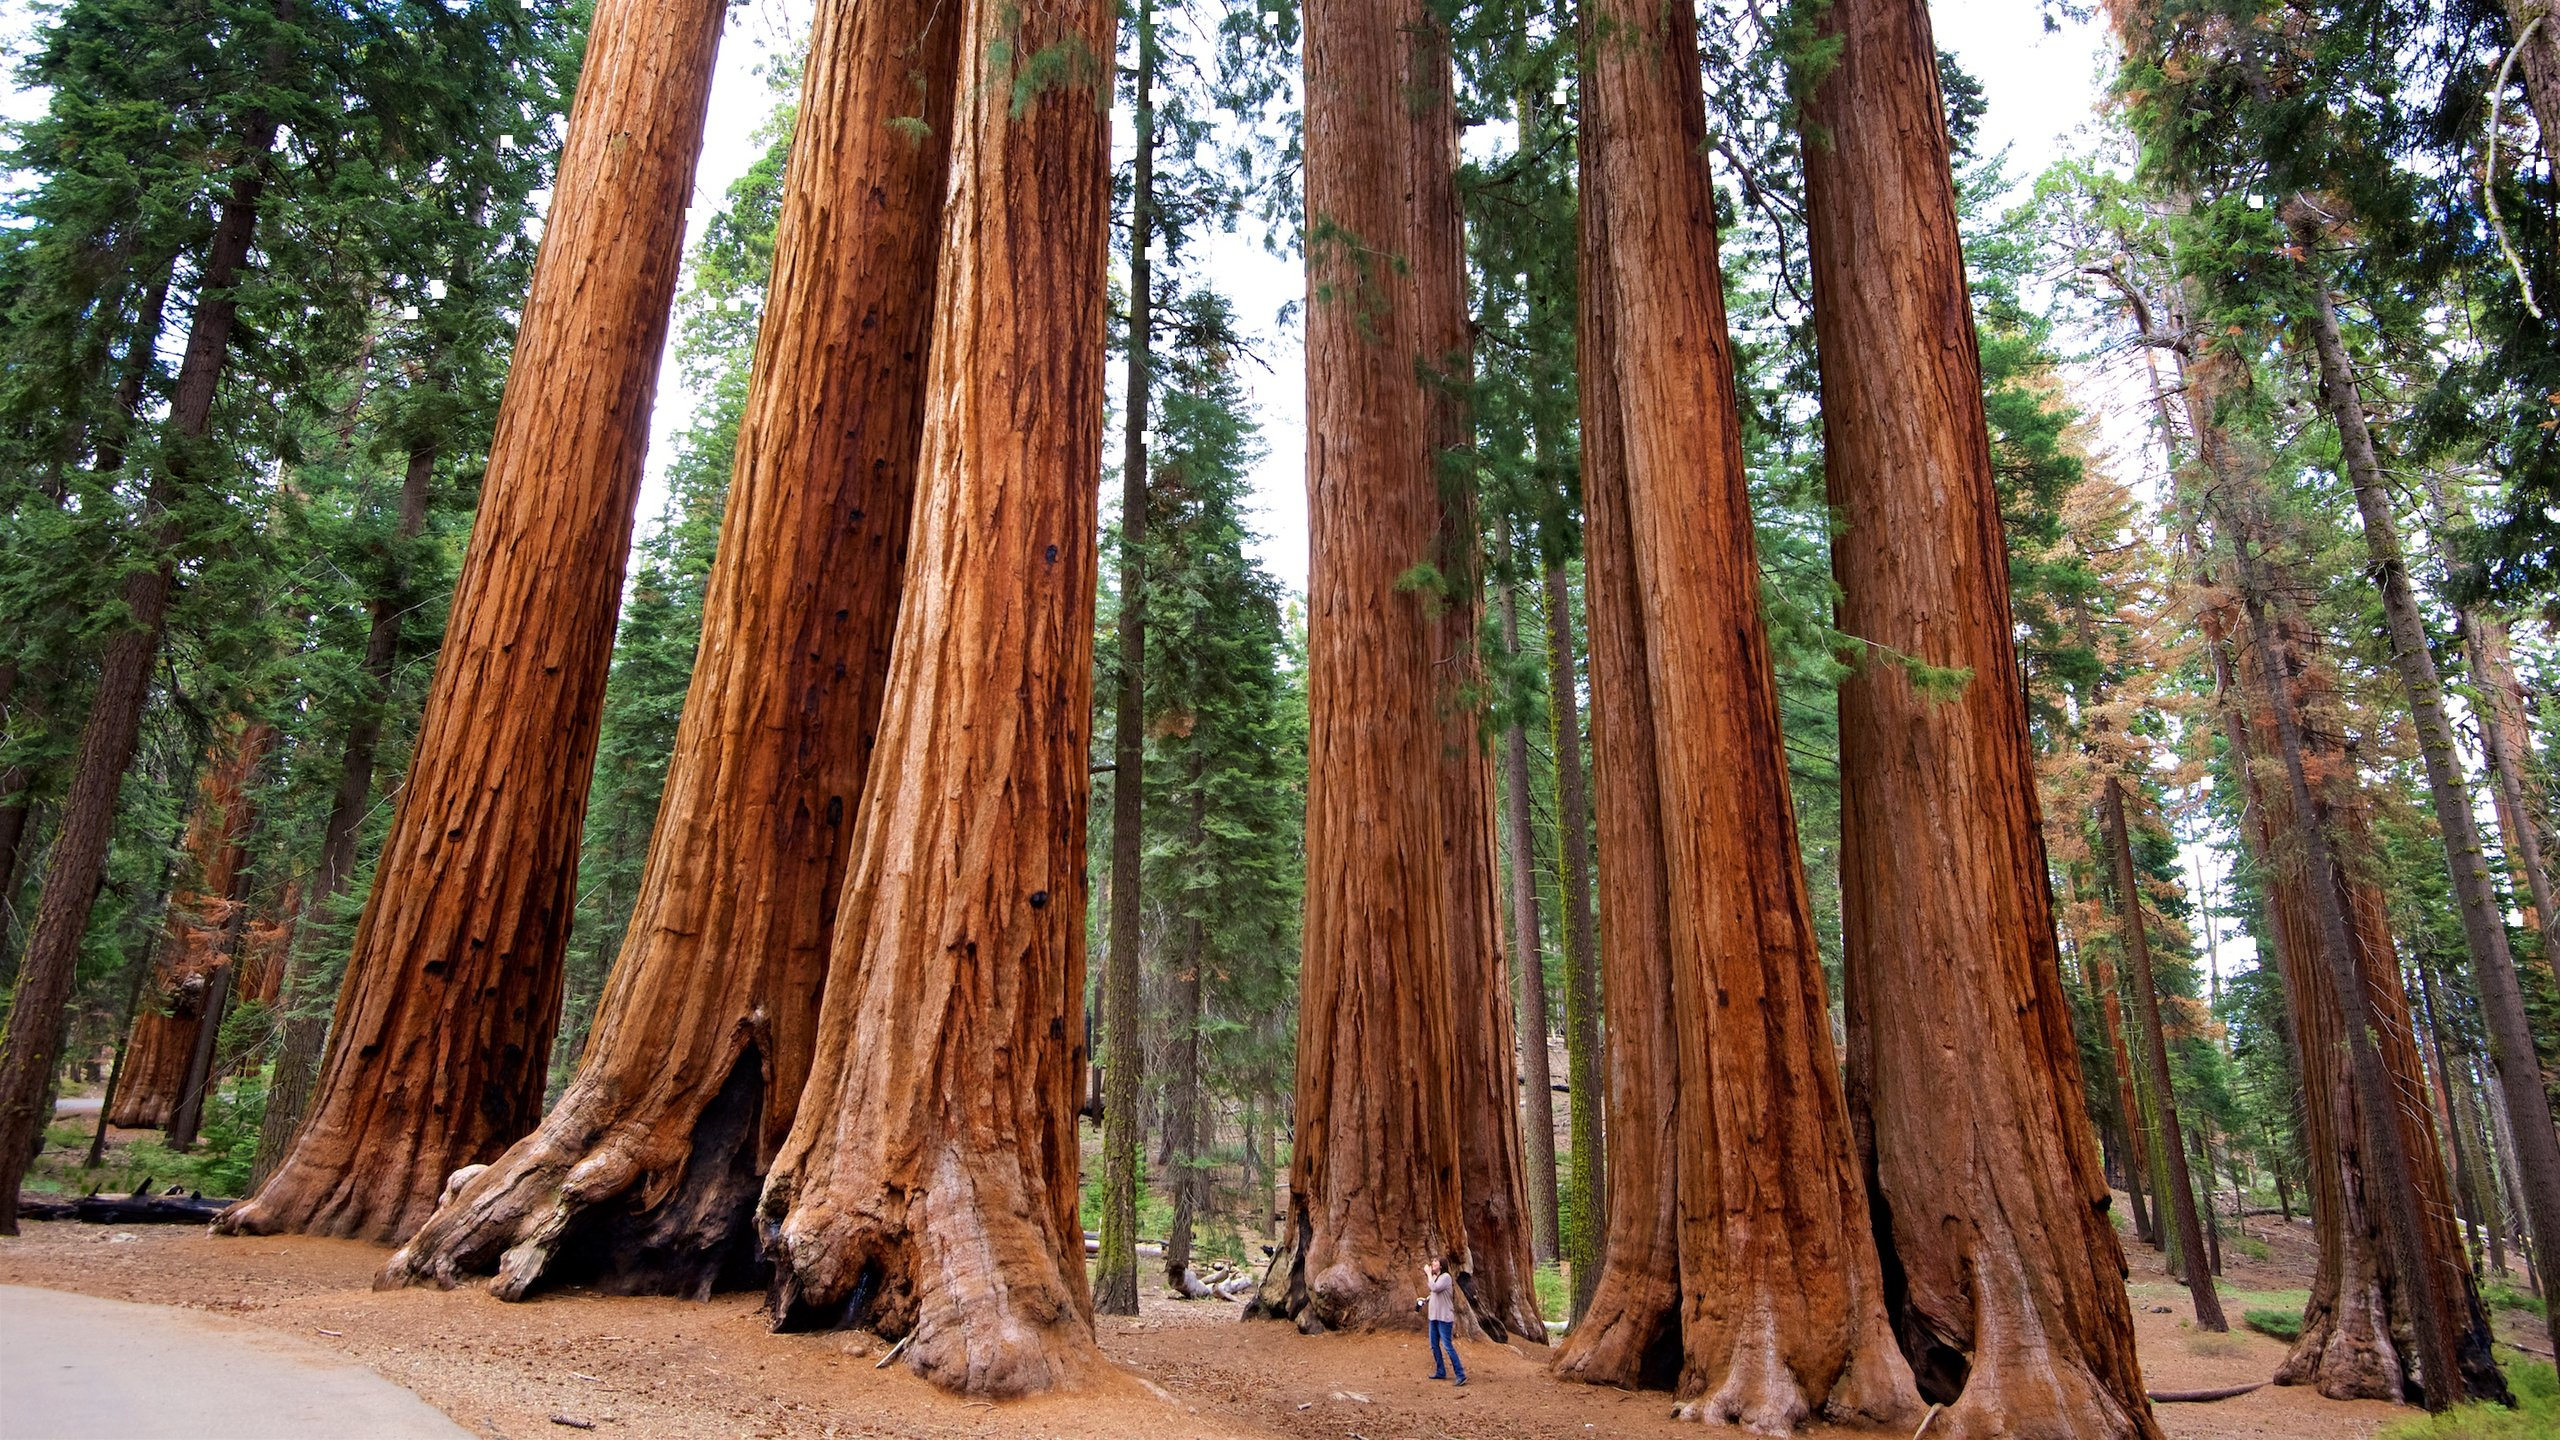 2560x1440 Sequoia National Park nature trees wallpaper | | 1405158 |